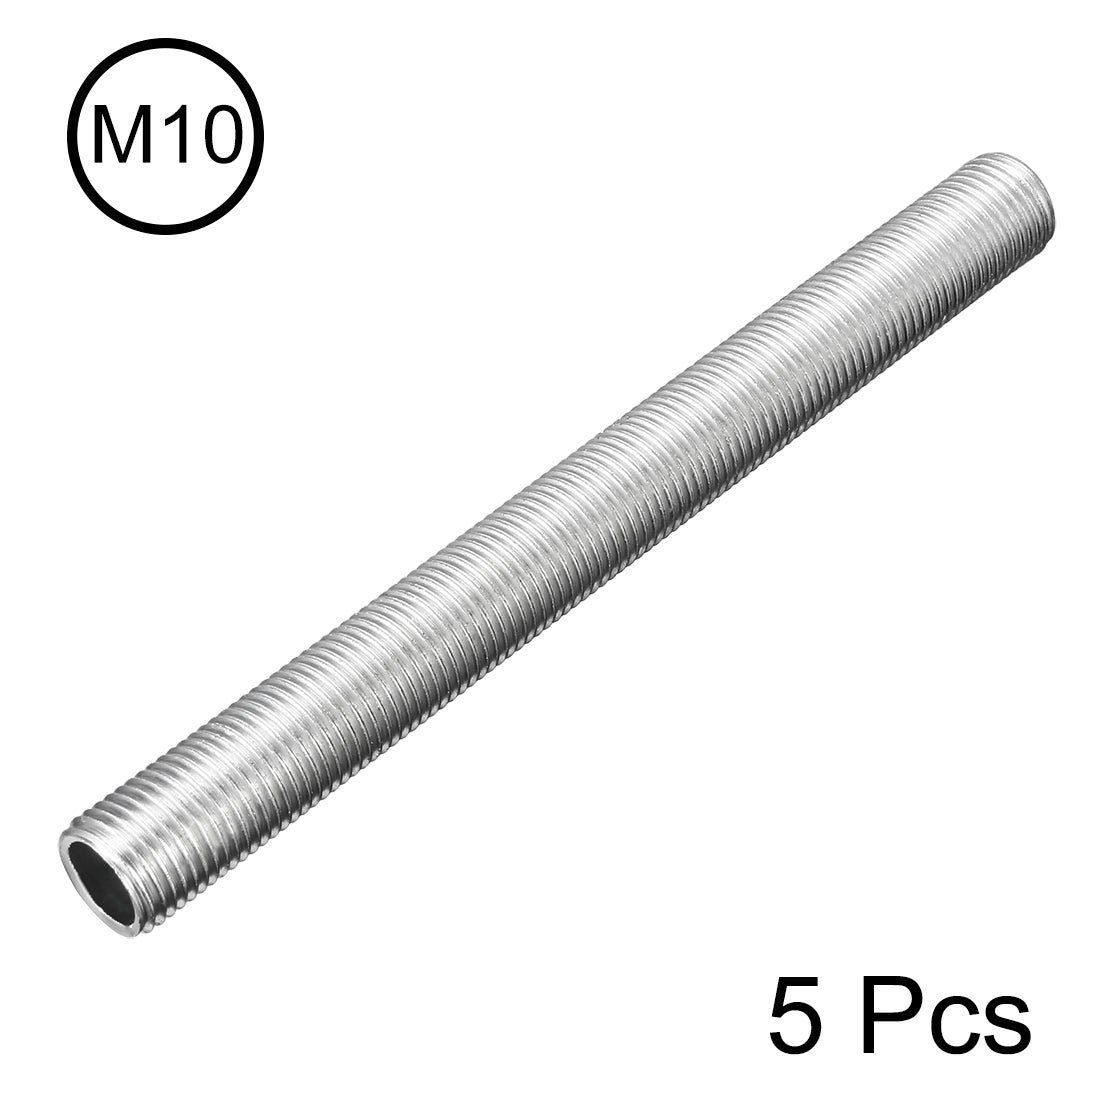 uxcell Uxcell Zinc Plated Lamp Pipe Nipple M10x1 100mm Length 1mm Pitch All Threaded 5Pcs